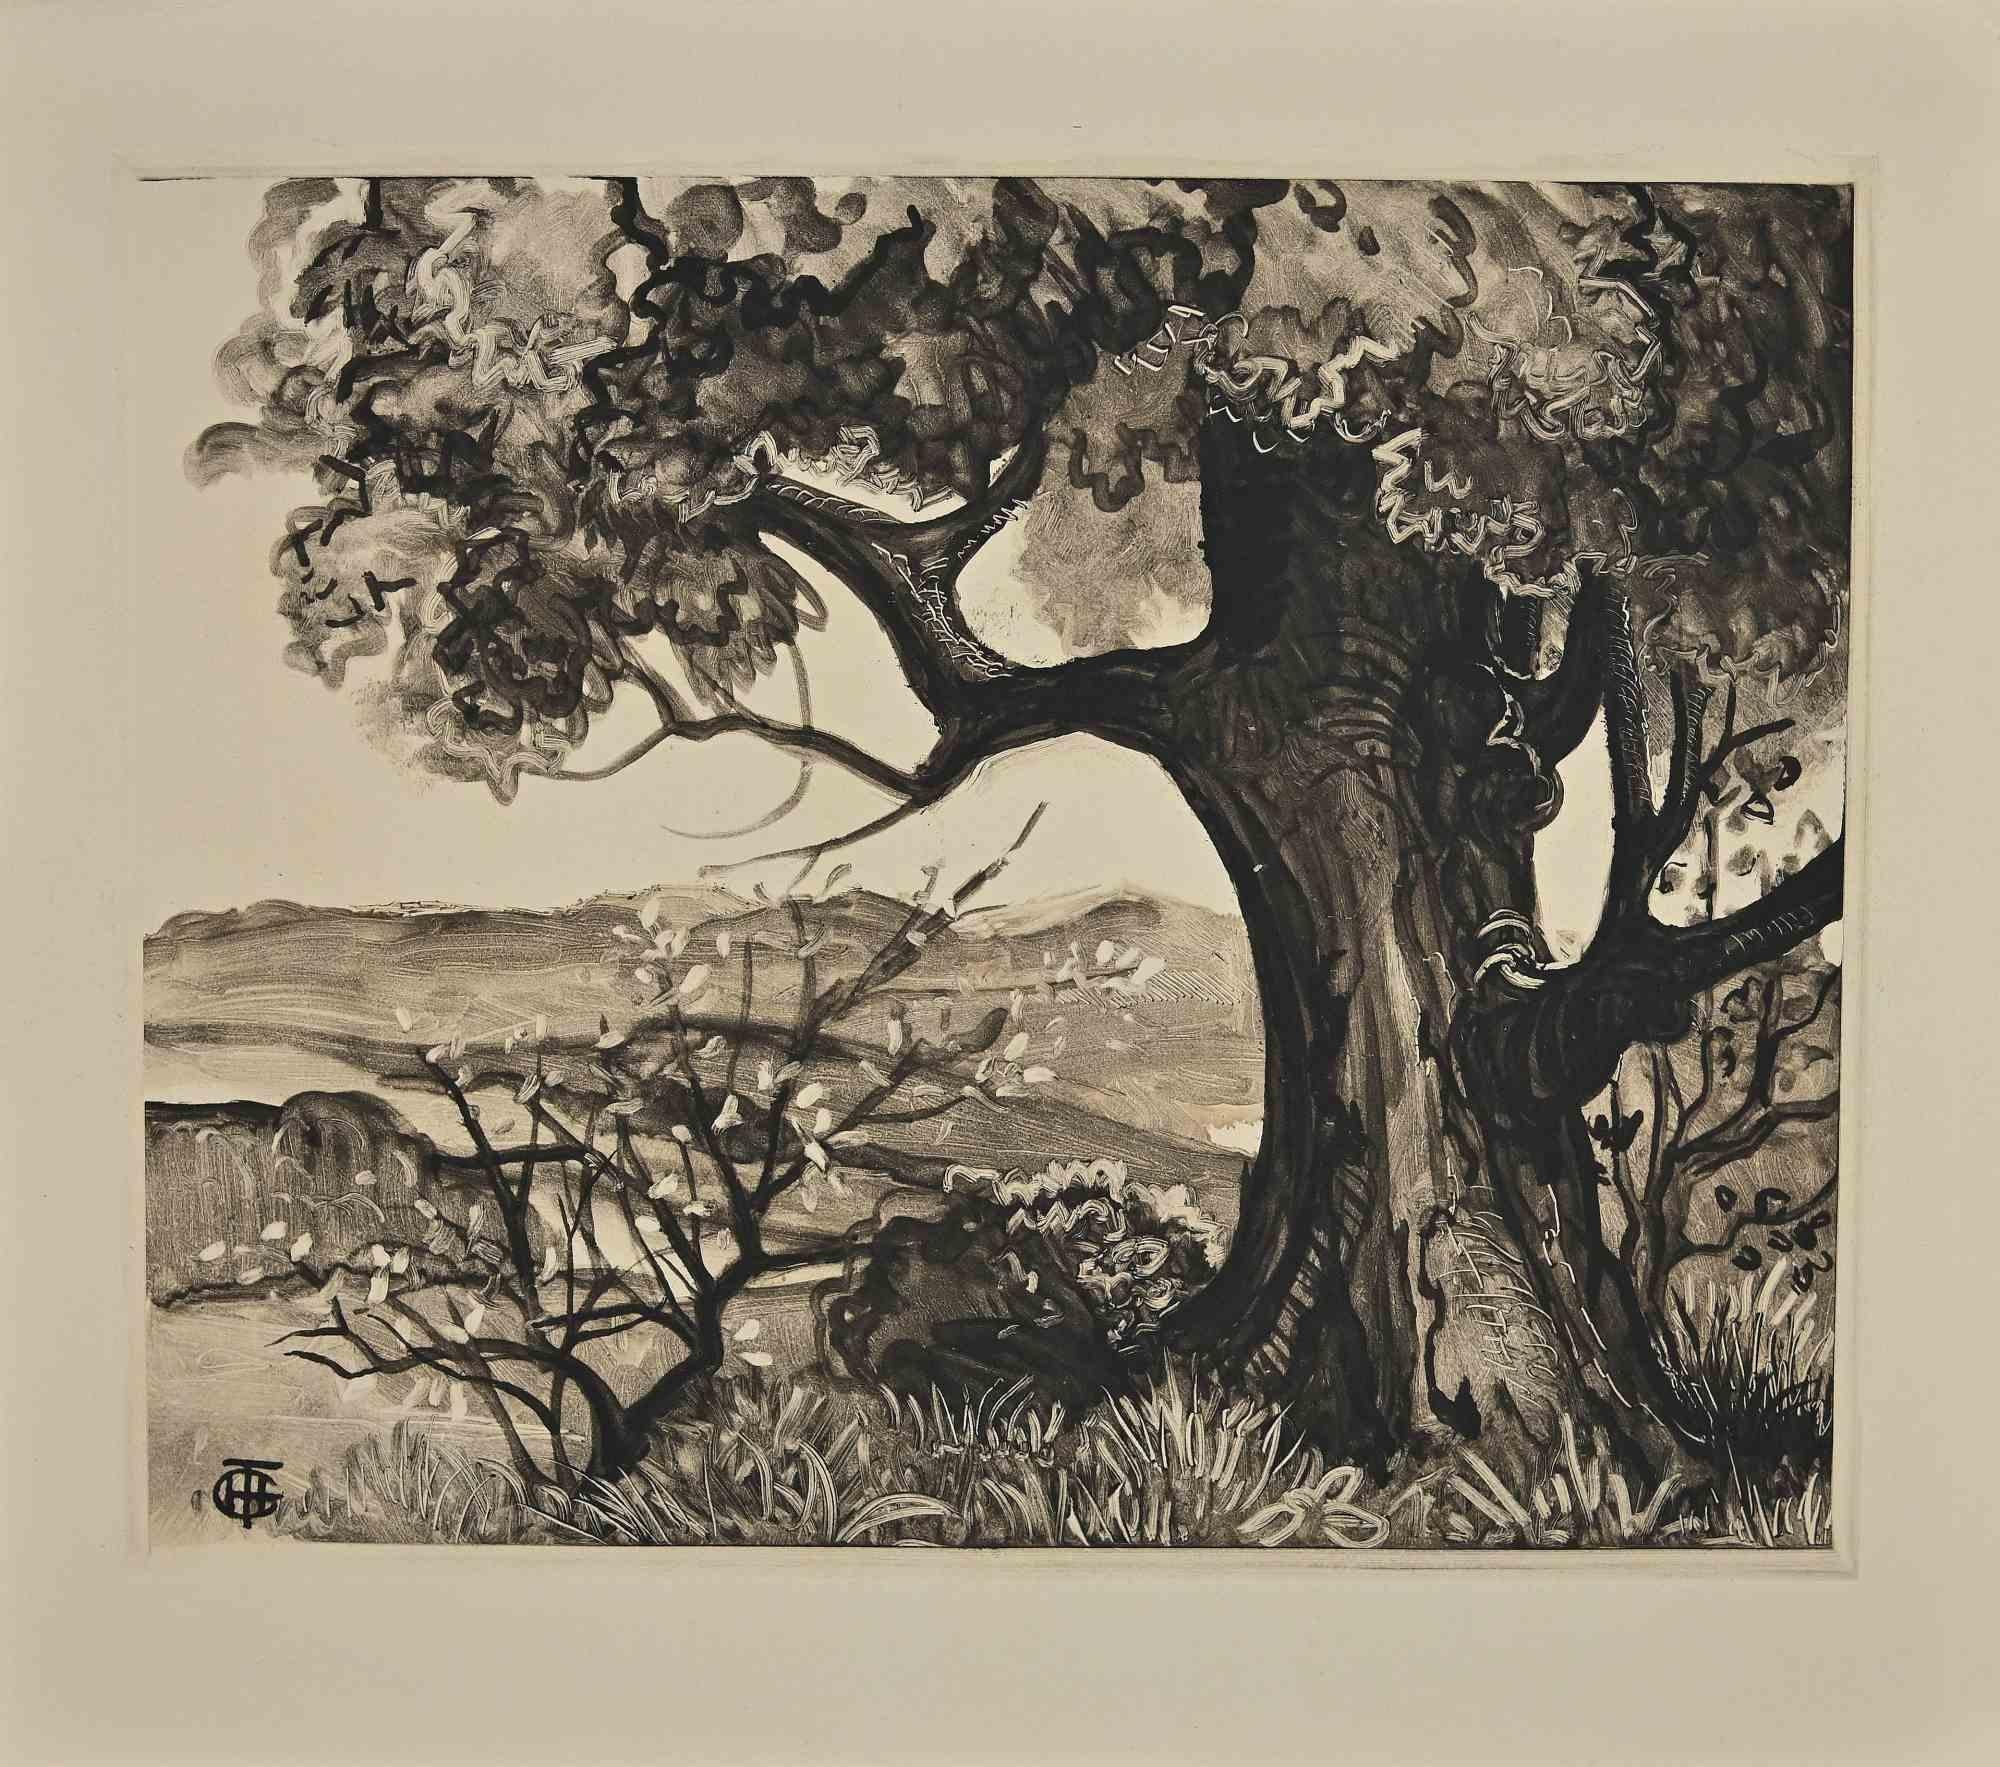 Georges-Henri Tribout Figurative Print - The Tree - Original Etching by George-Henri Tribout - Early 20th Century